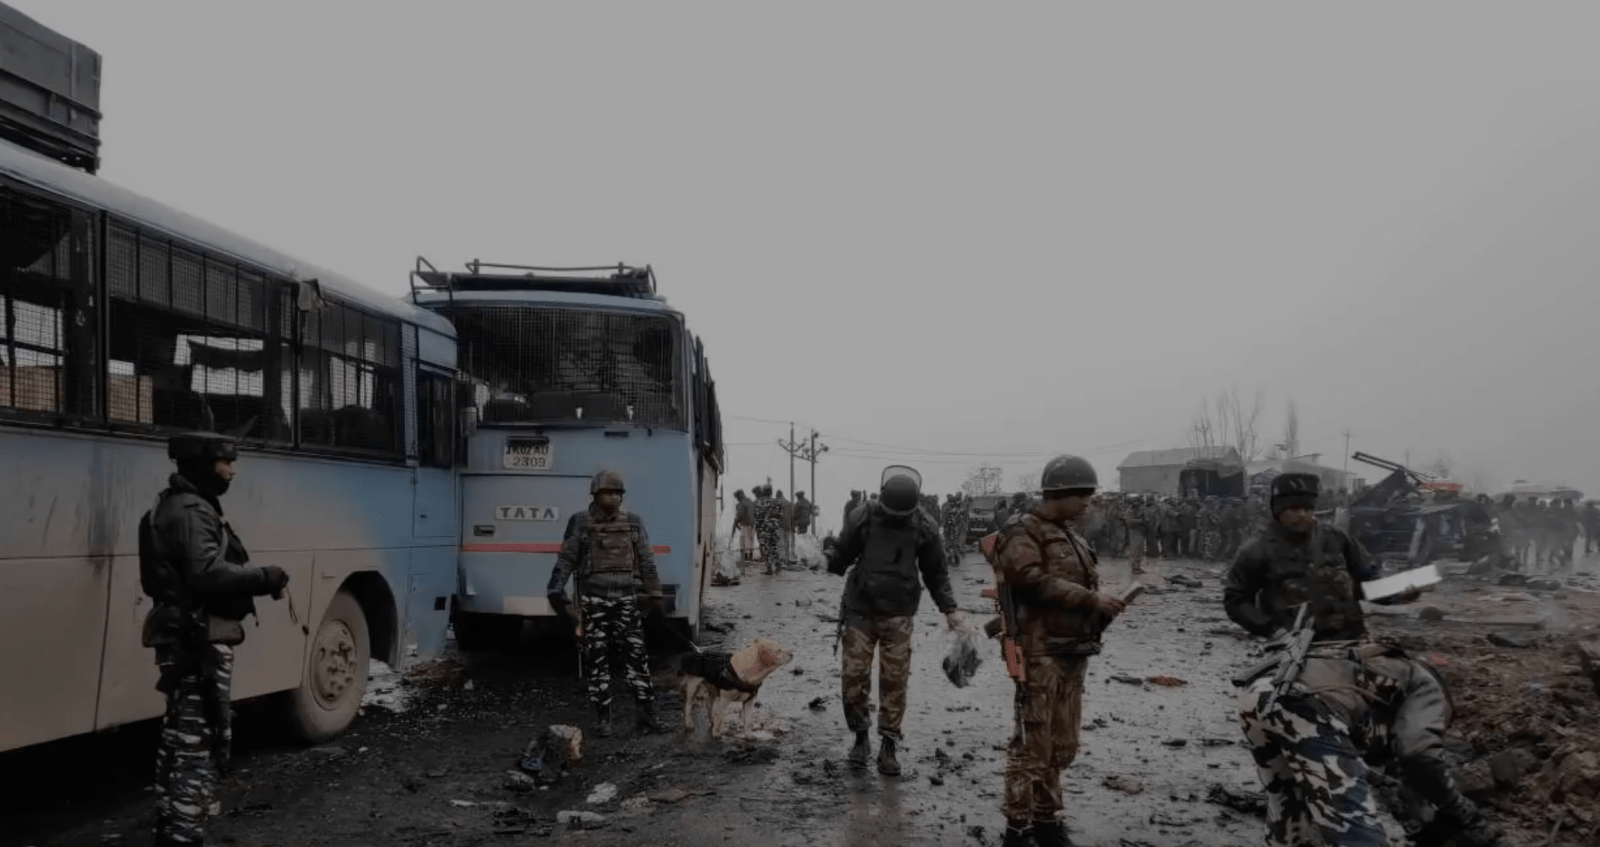 Pulwama Crisis and Prospect of Nuclear War between India and Pakistan